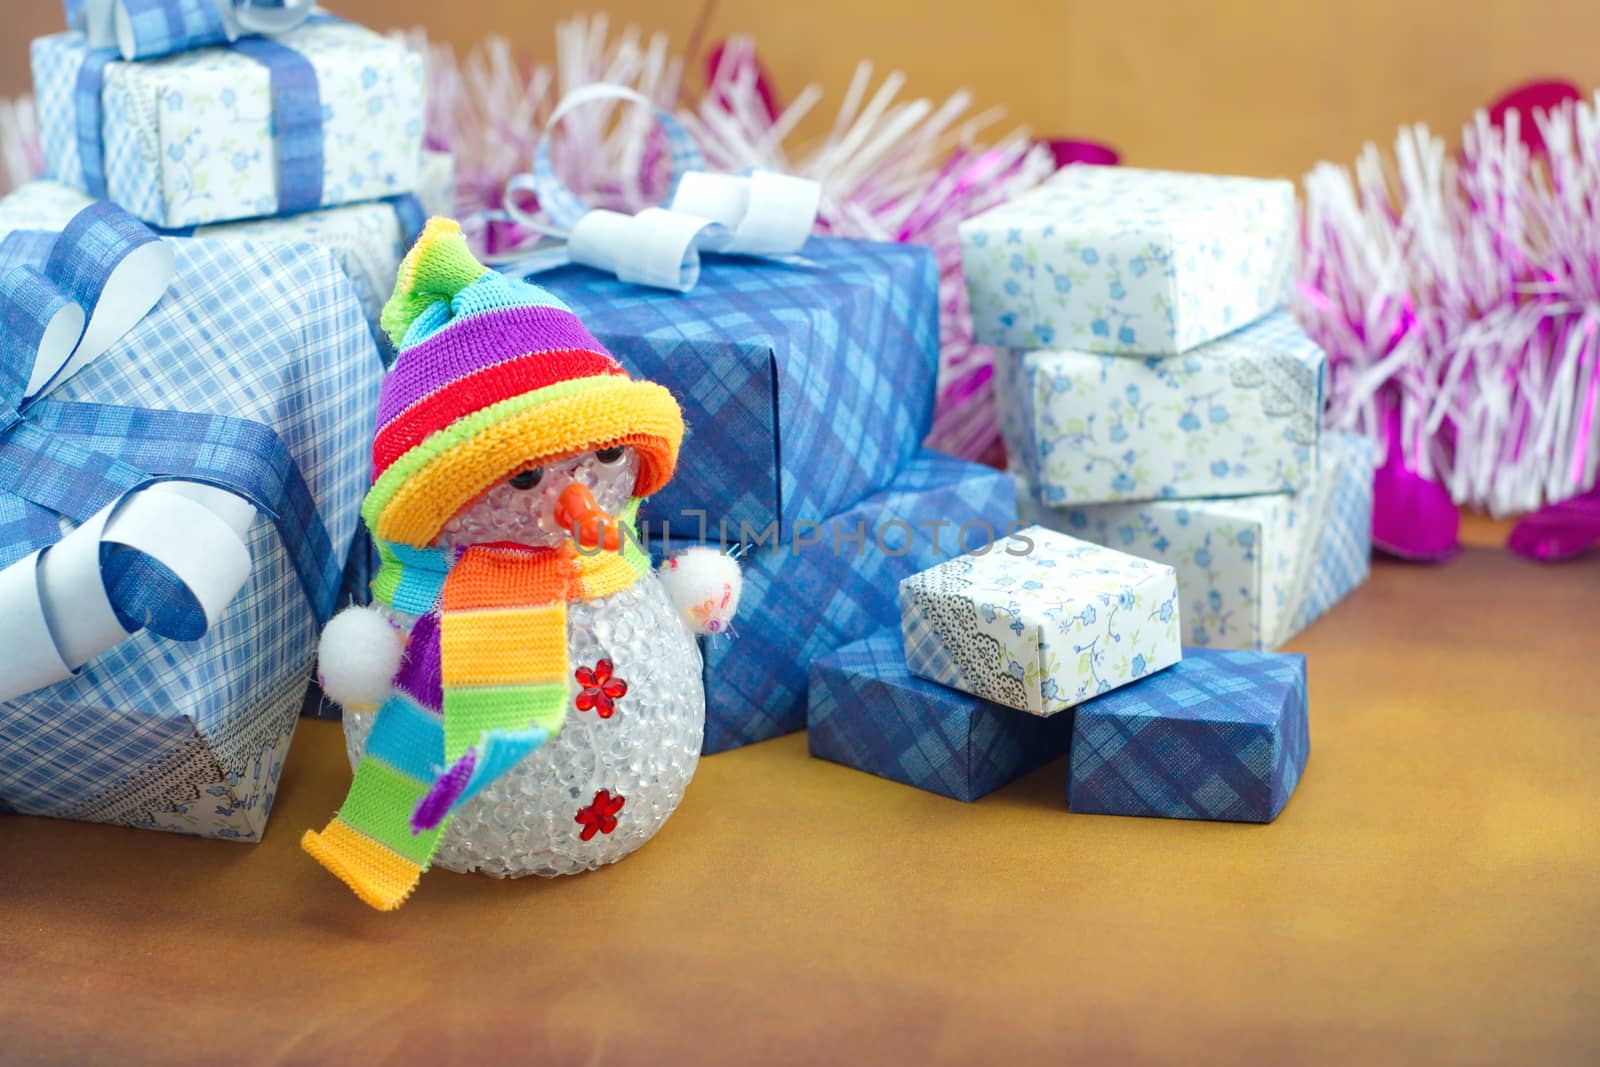 Snowman and gift box on the floor